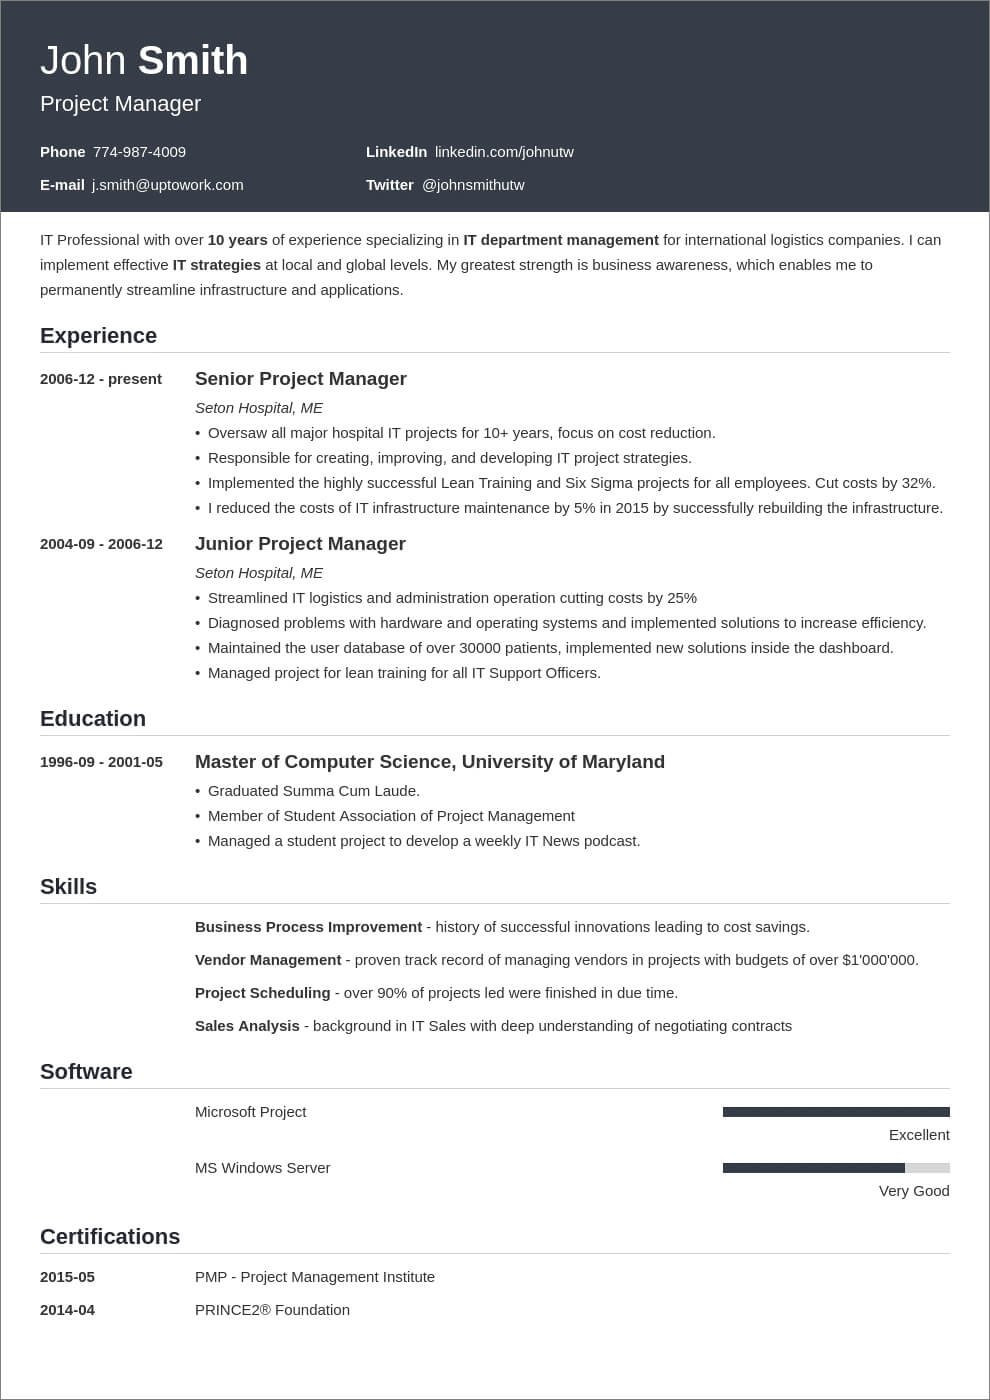 Applicant Tracking System Friendly Resume Template 11 ats-friendly Resume Templates that Beat the Bots In 2021